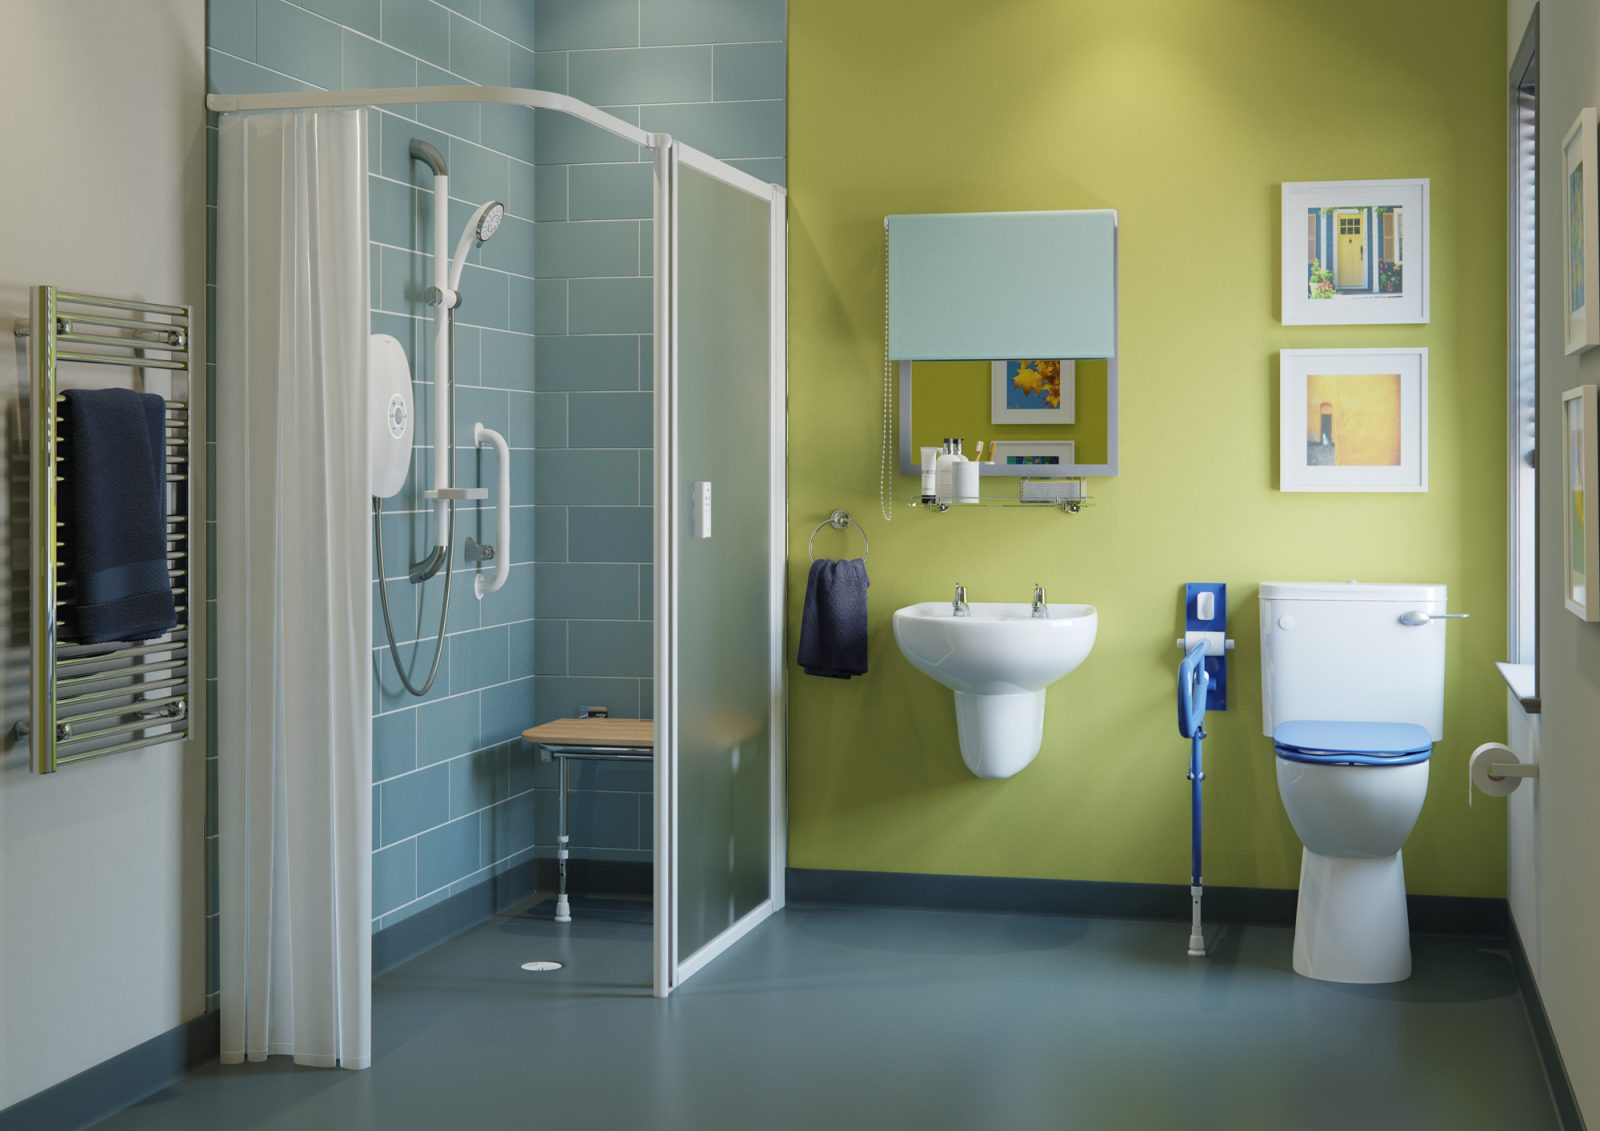 A Guide To Disabled Showers | Age Care Bathrooms